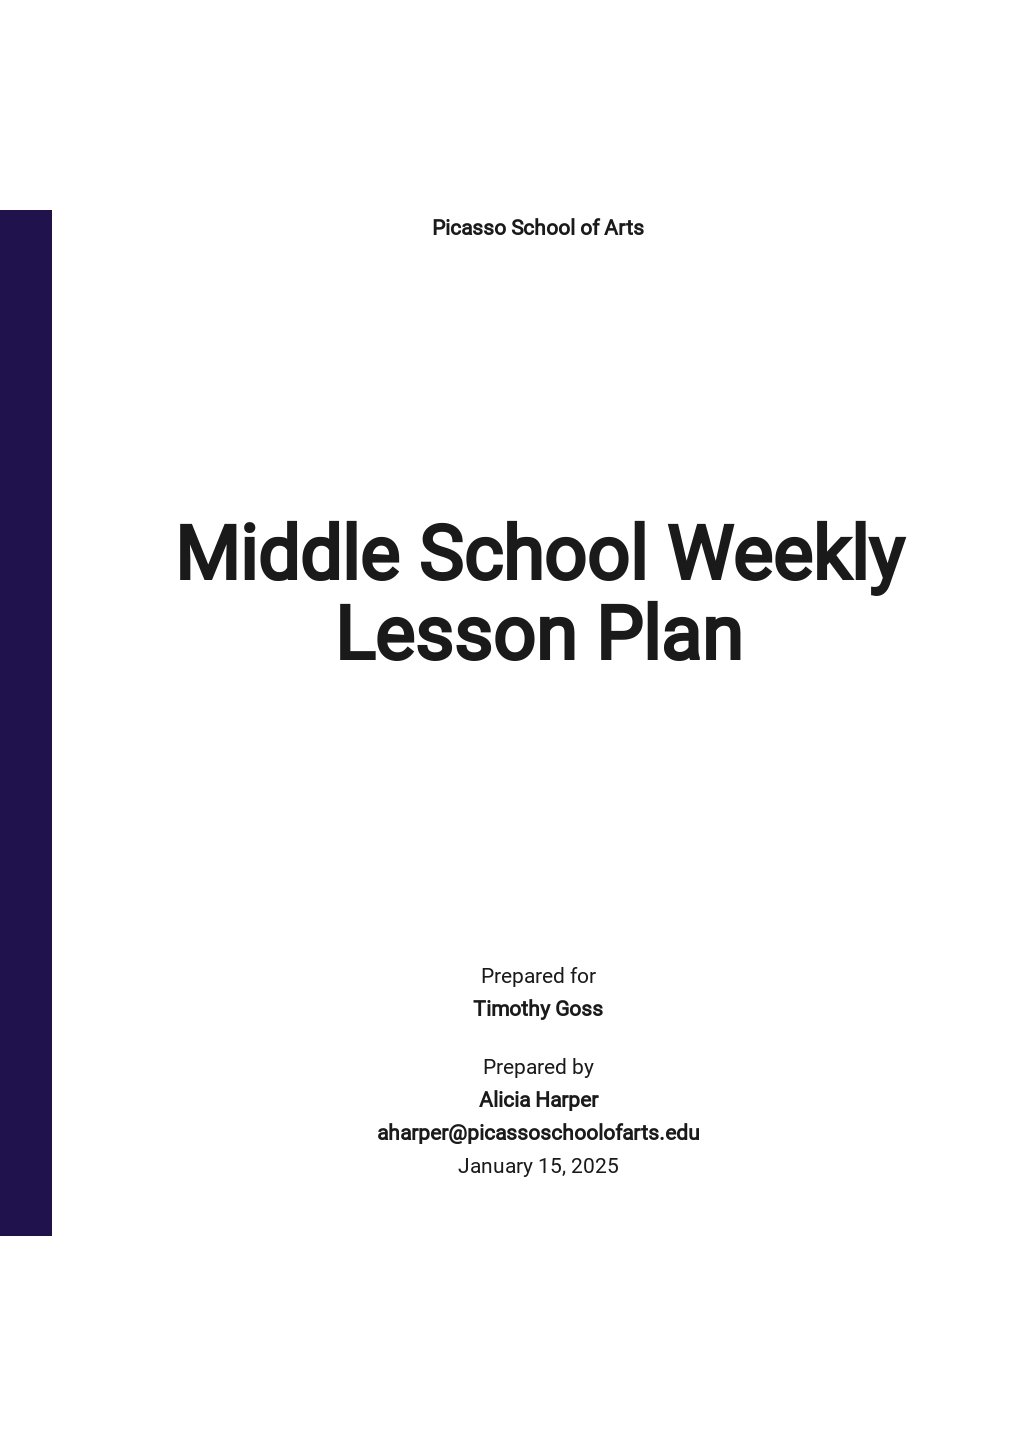 Middle School Weekly Lesson Plan Template